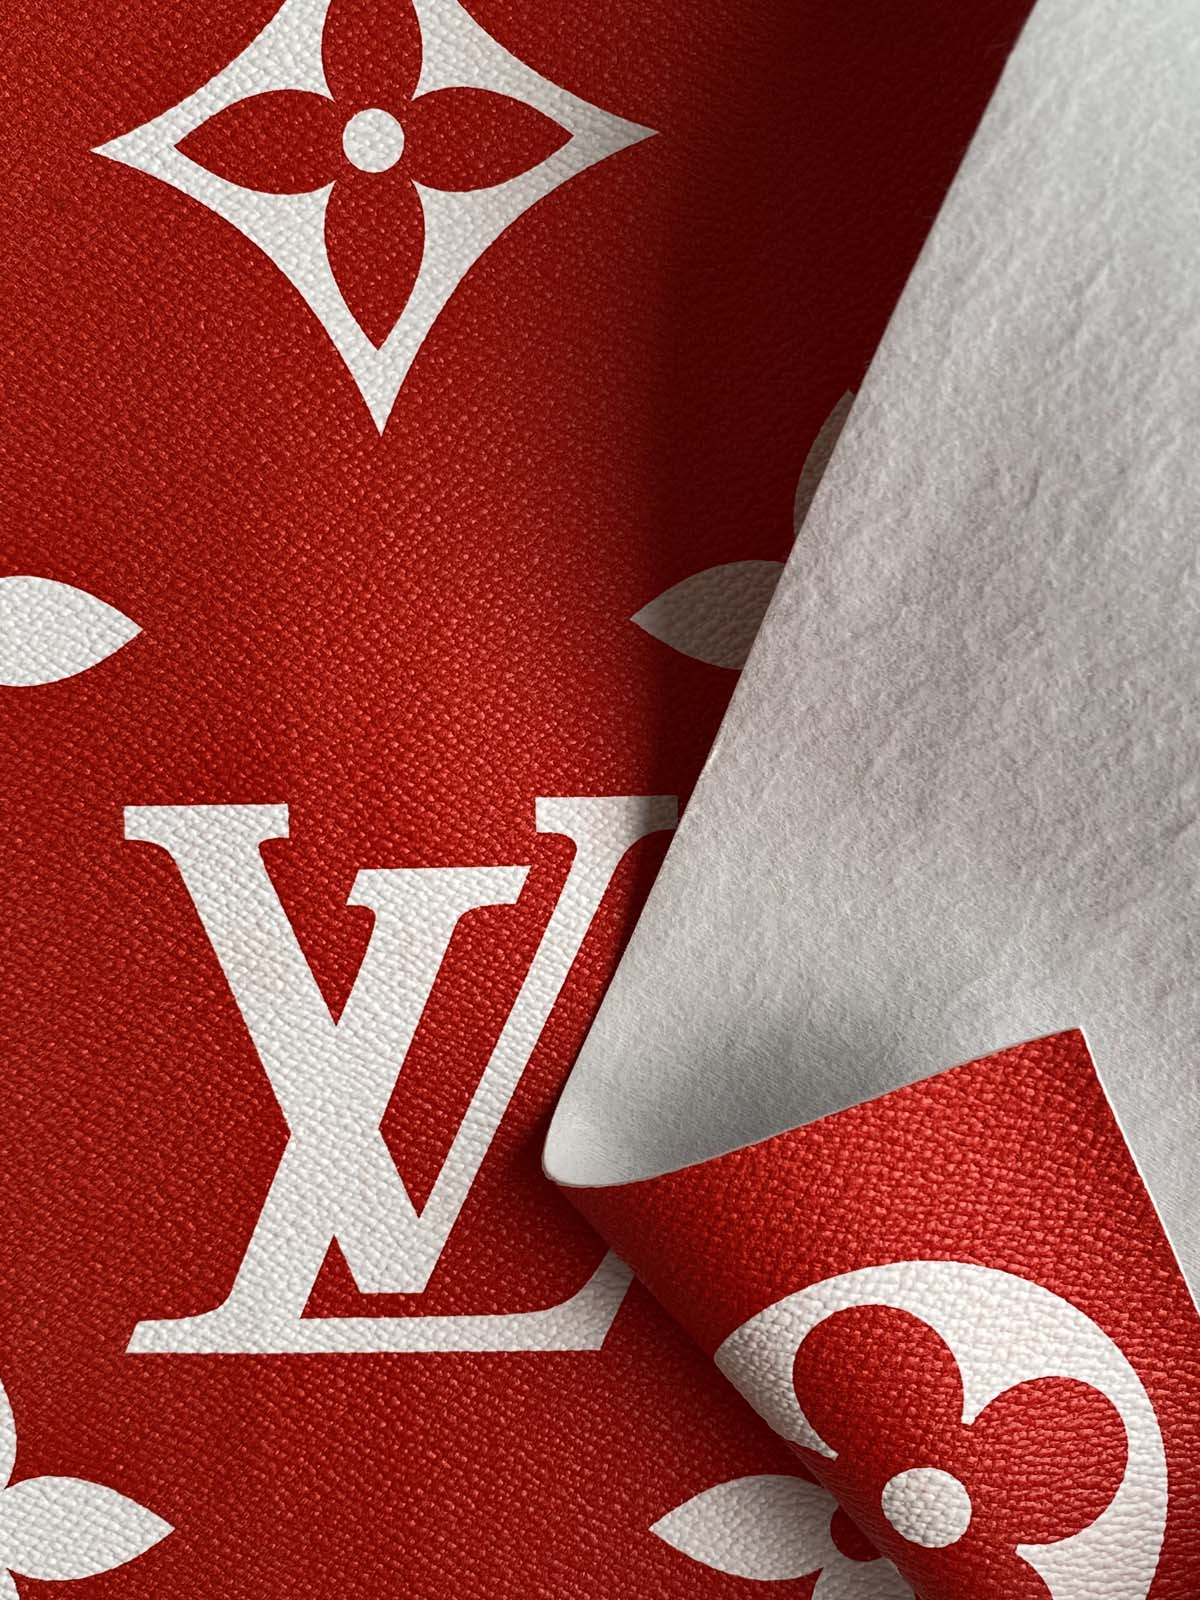 Louis Vuitton Red Leather Fabric, Lv Material leather Red